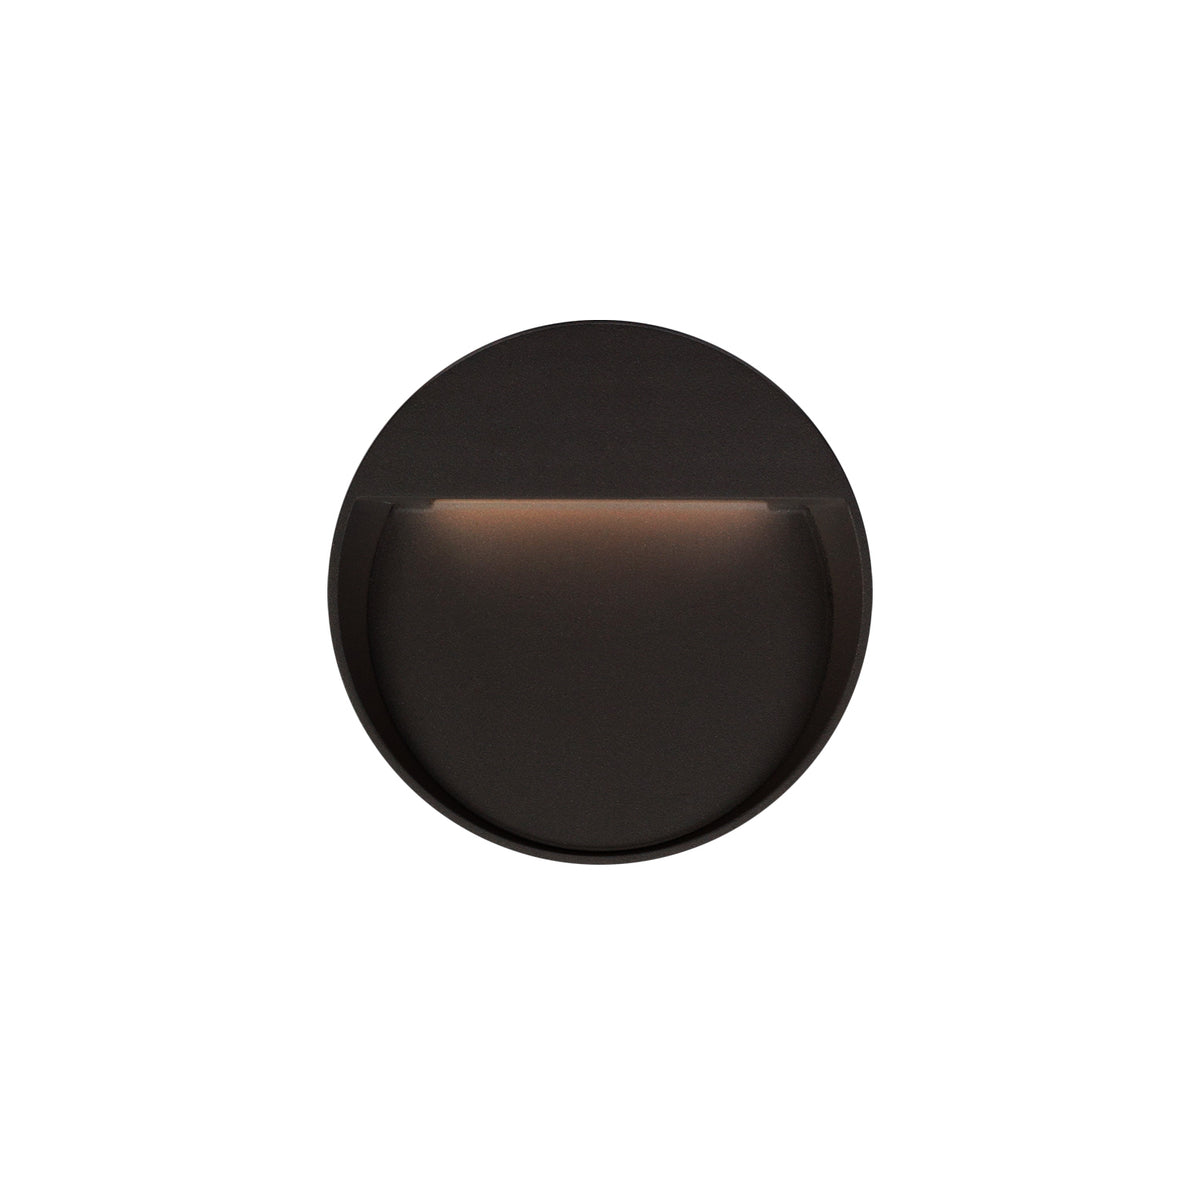 Kuzco Lighting LED Wall Sconce from the Mesa collection in Black finish